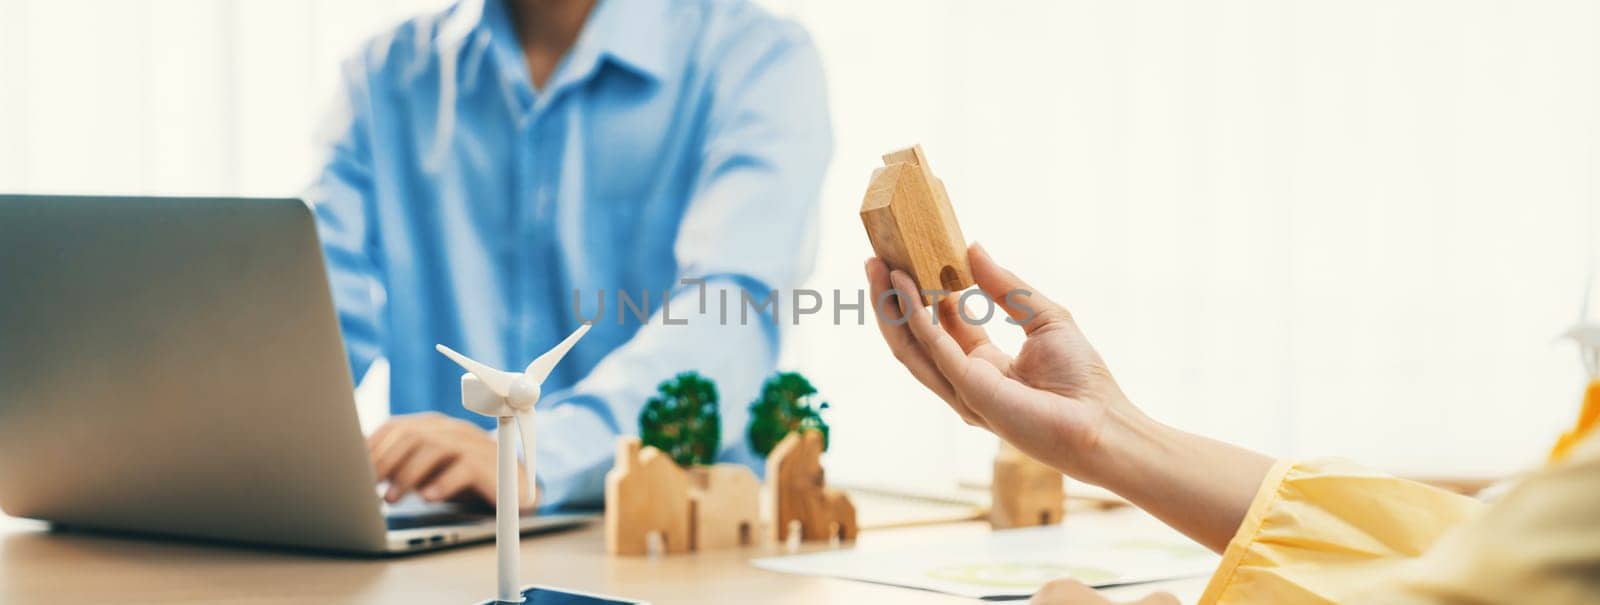 Businesswoman decides to Invest in green business. Skilled architects plan to build a eco house by using renewable energy at table with environmental document scatter around. Close up. Delineation.